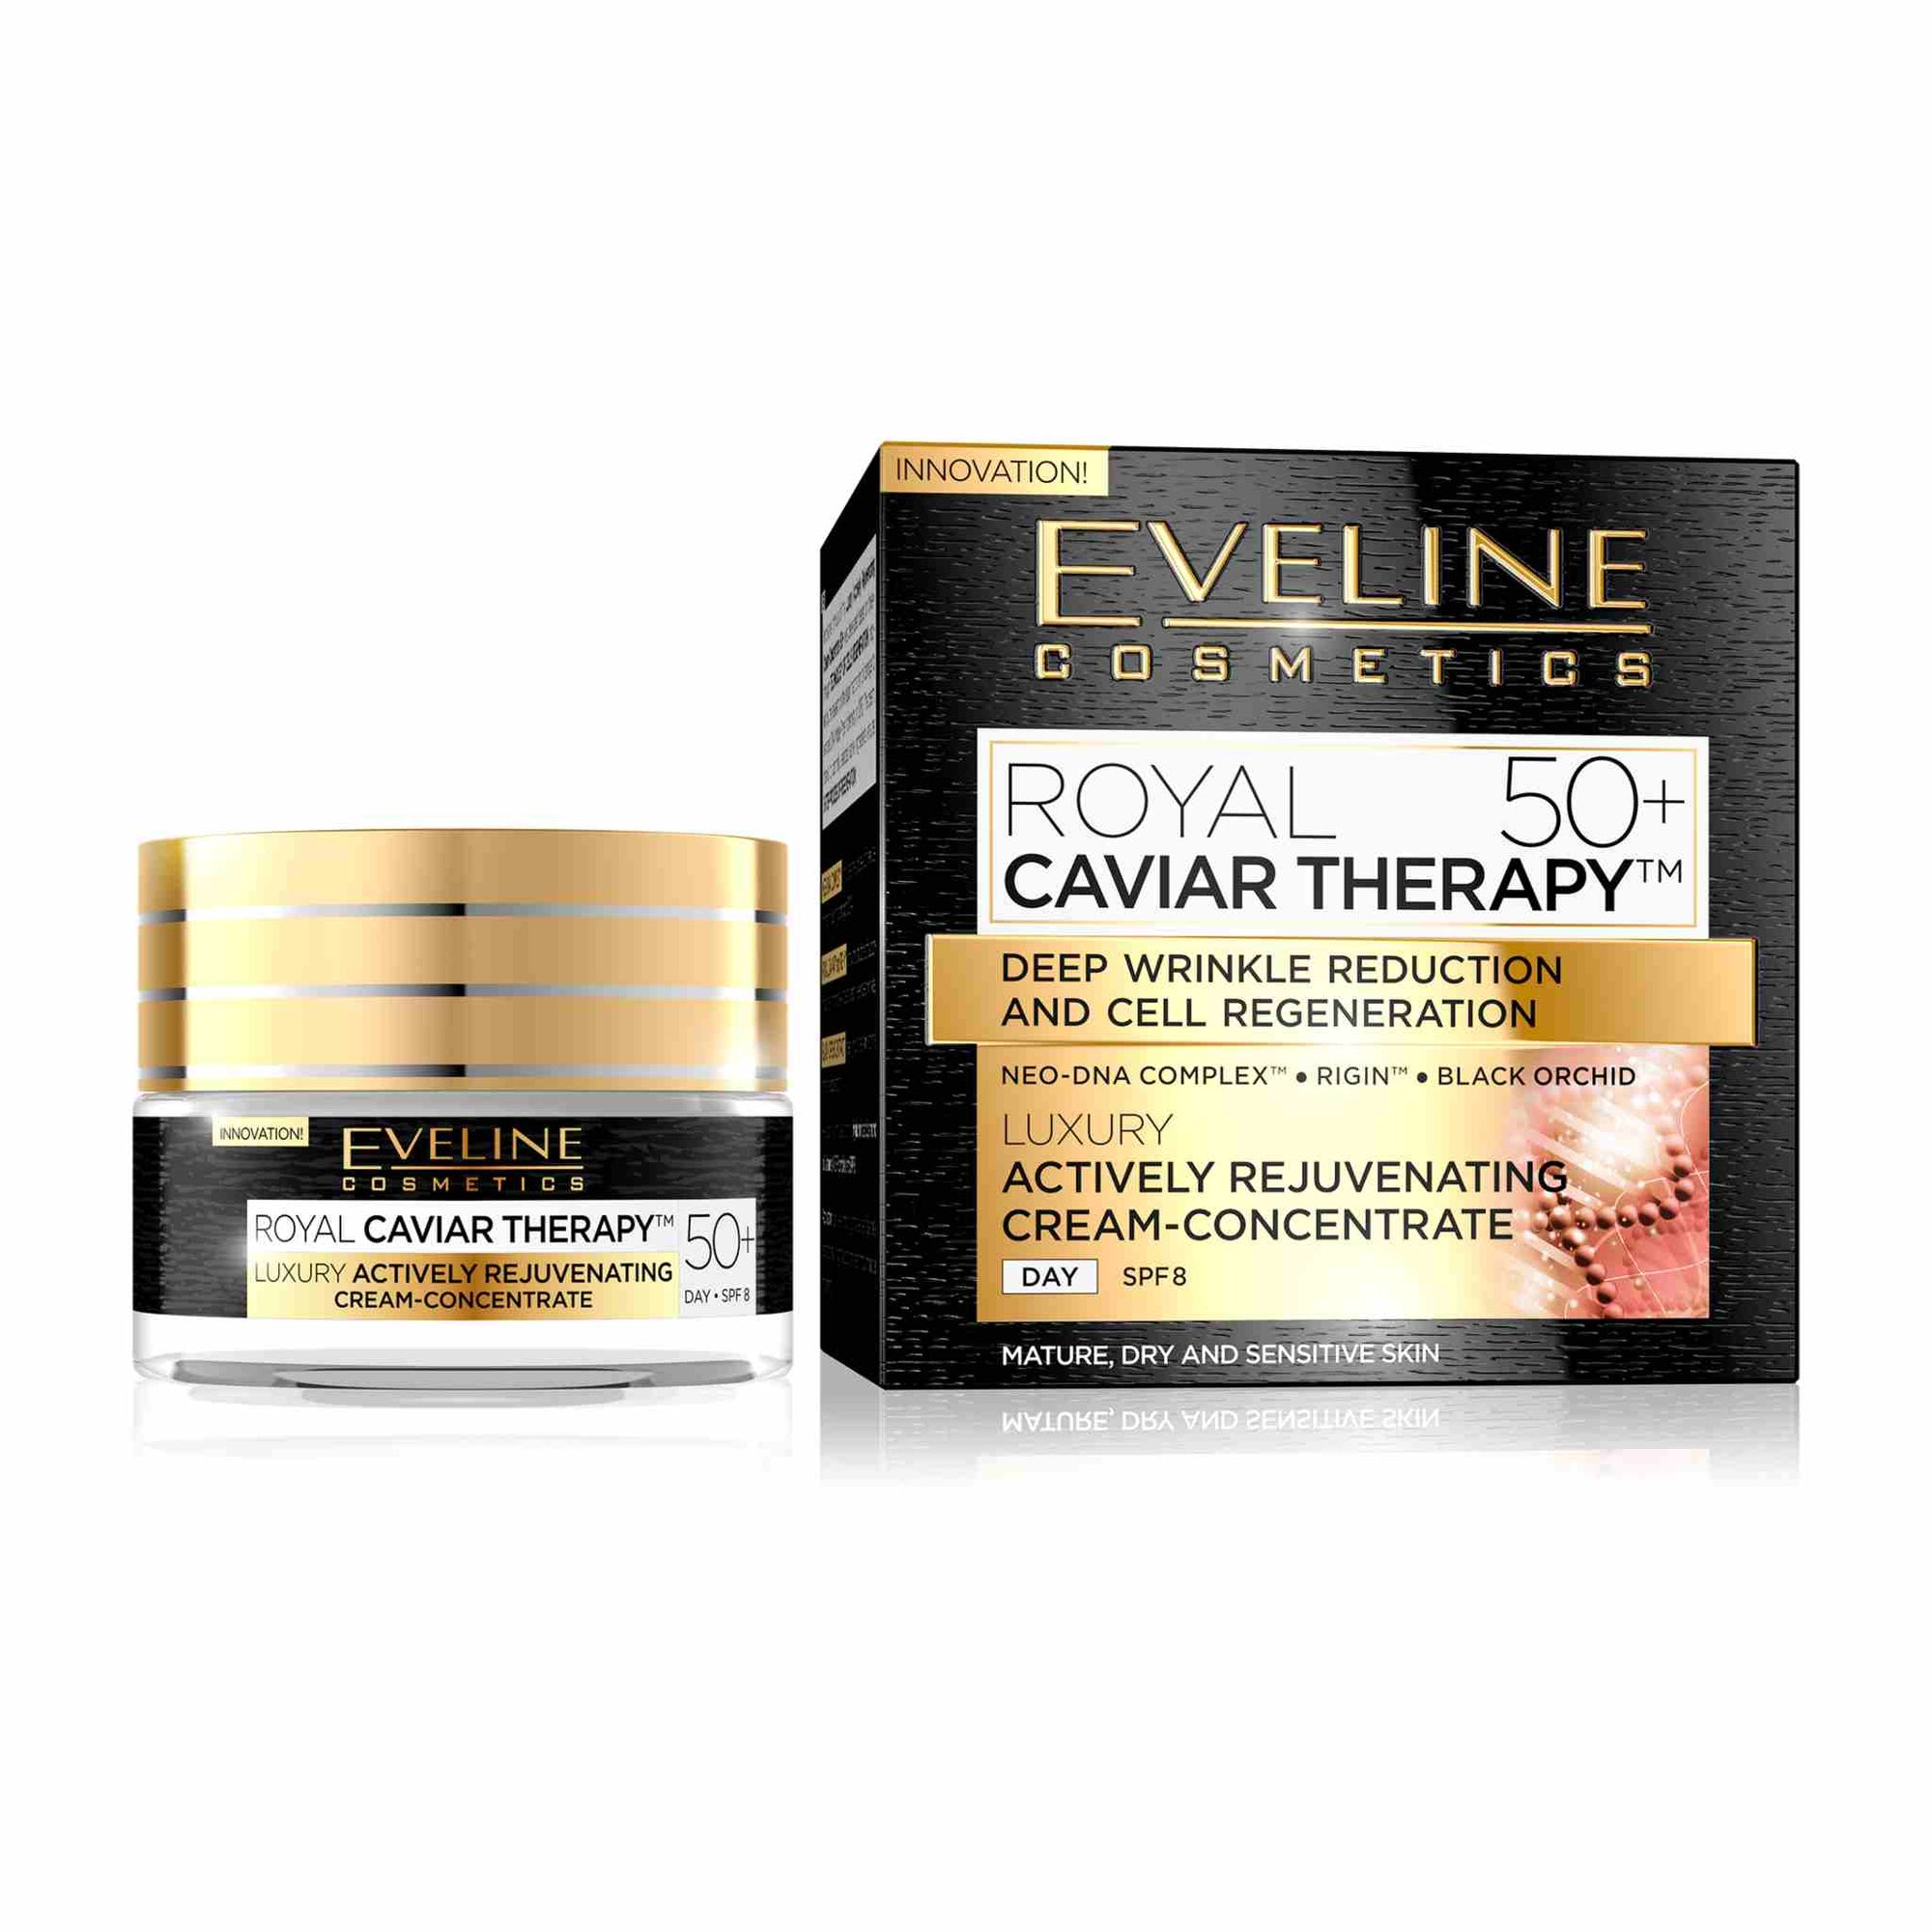 Royal Caviar Therapy Luxury Actively Rejuvenating Day Cream Concentrate 50+